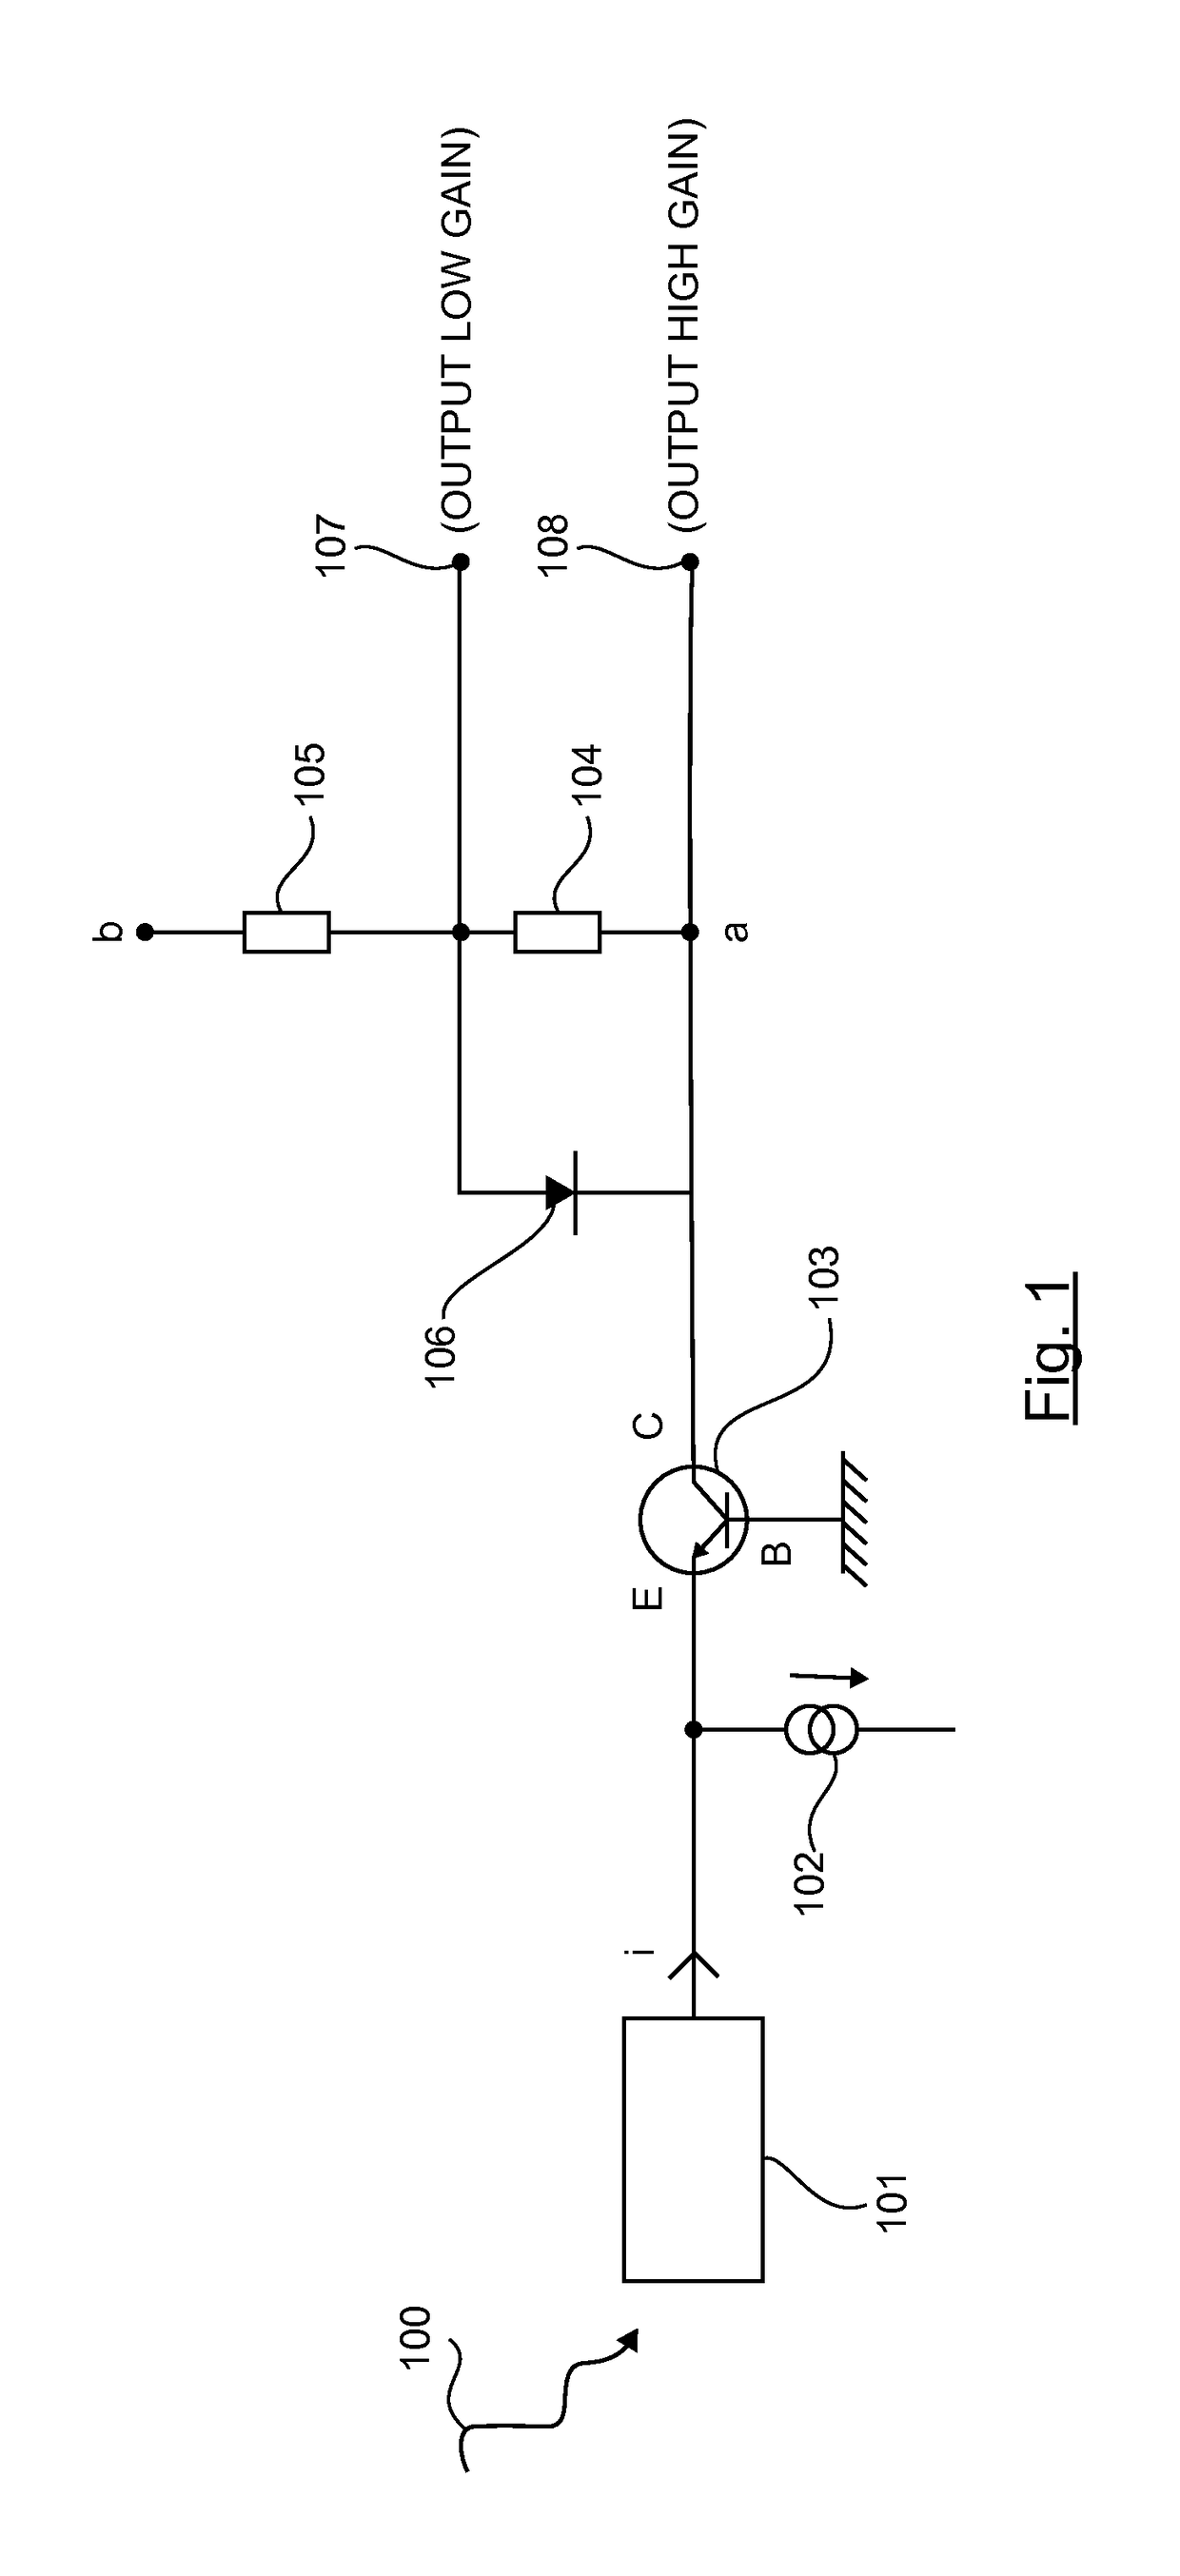 Electronic circuit comprising a current conveyor arranged with an anti-saturation device and corresponding device for detecting photons